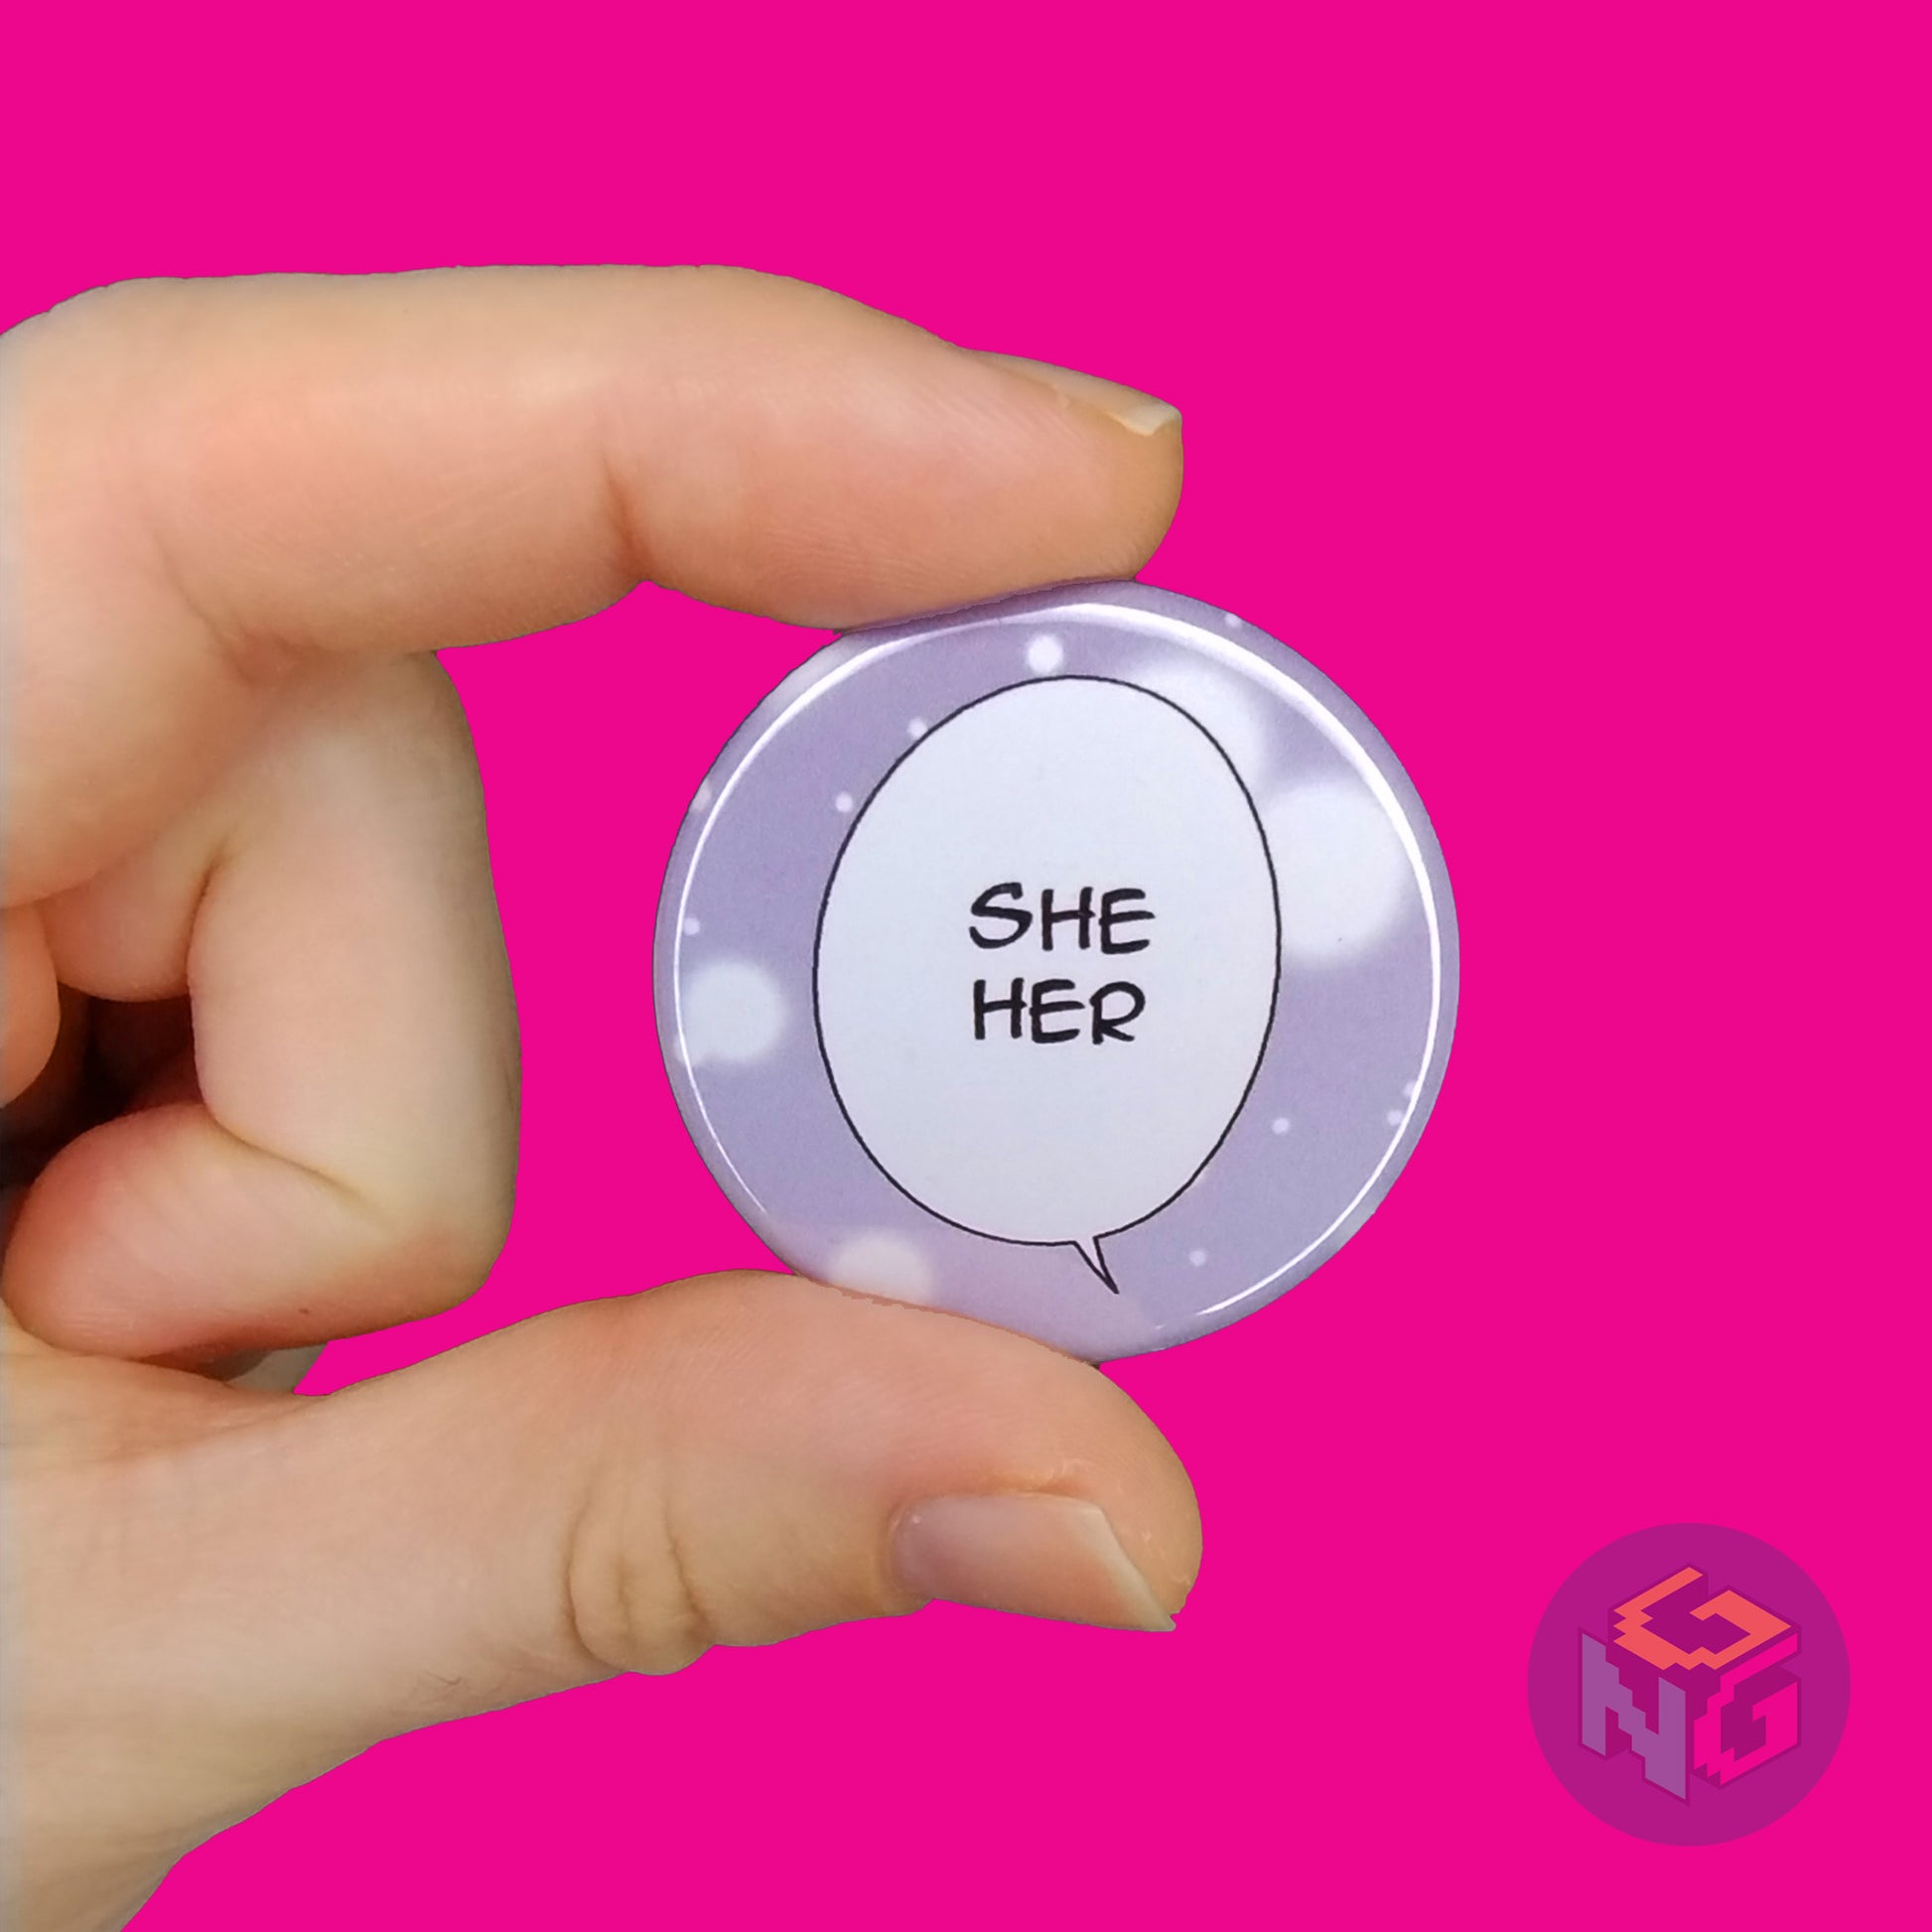 hand holding black and white she her comic pronoun pin in front of pink background